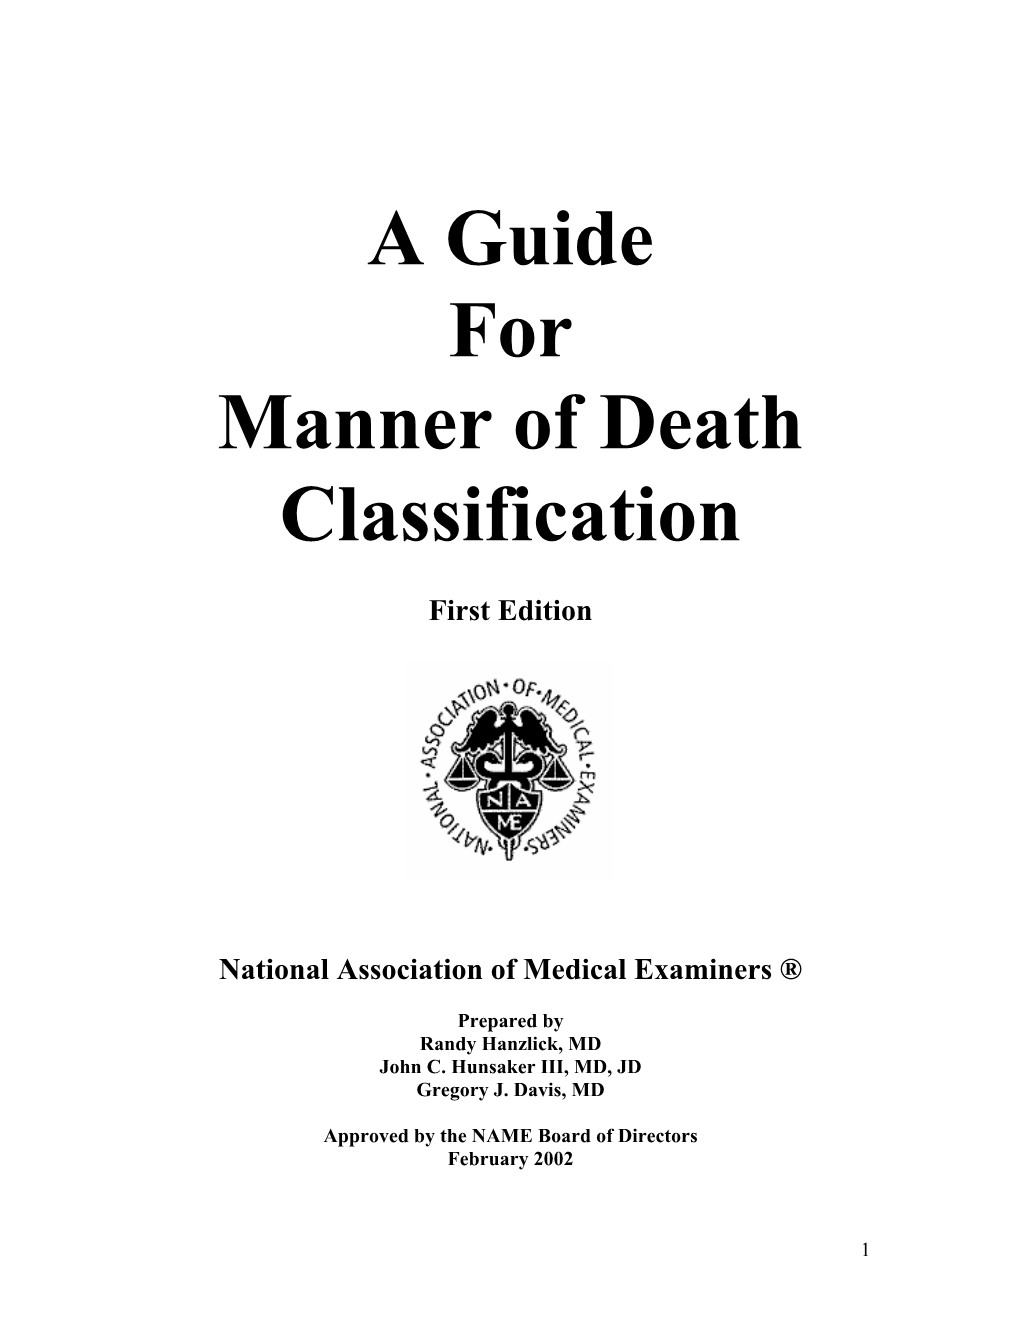 The Guide for Manner of Death Classification